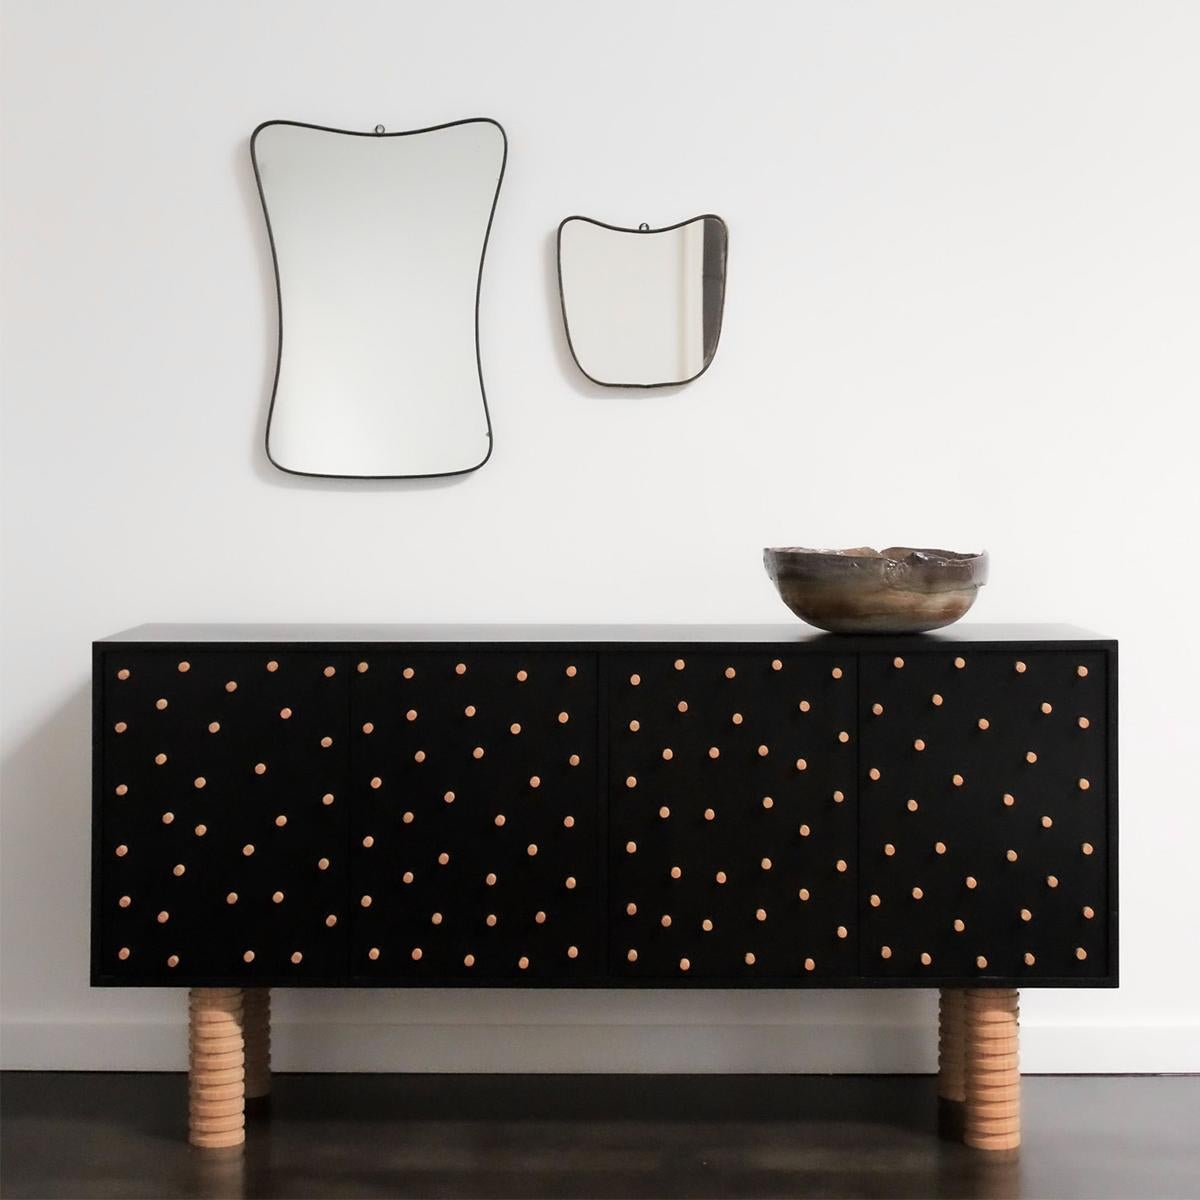 This handmade Postmodern / Brutalist Sideboard by Reeves Art + Design, a family-owned Houston, TX based art gallery, is crafted in oak and ebonized oak. The oak construction features hand carved legs and a 1/2” peg detail that protrudes on all four